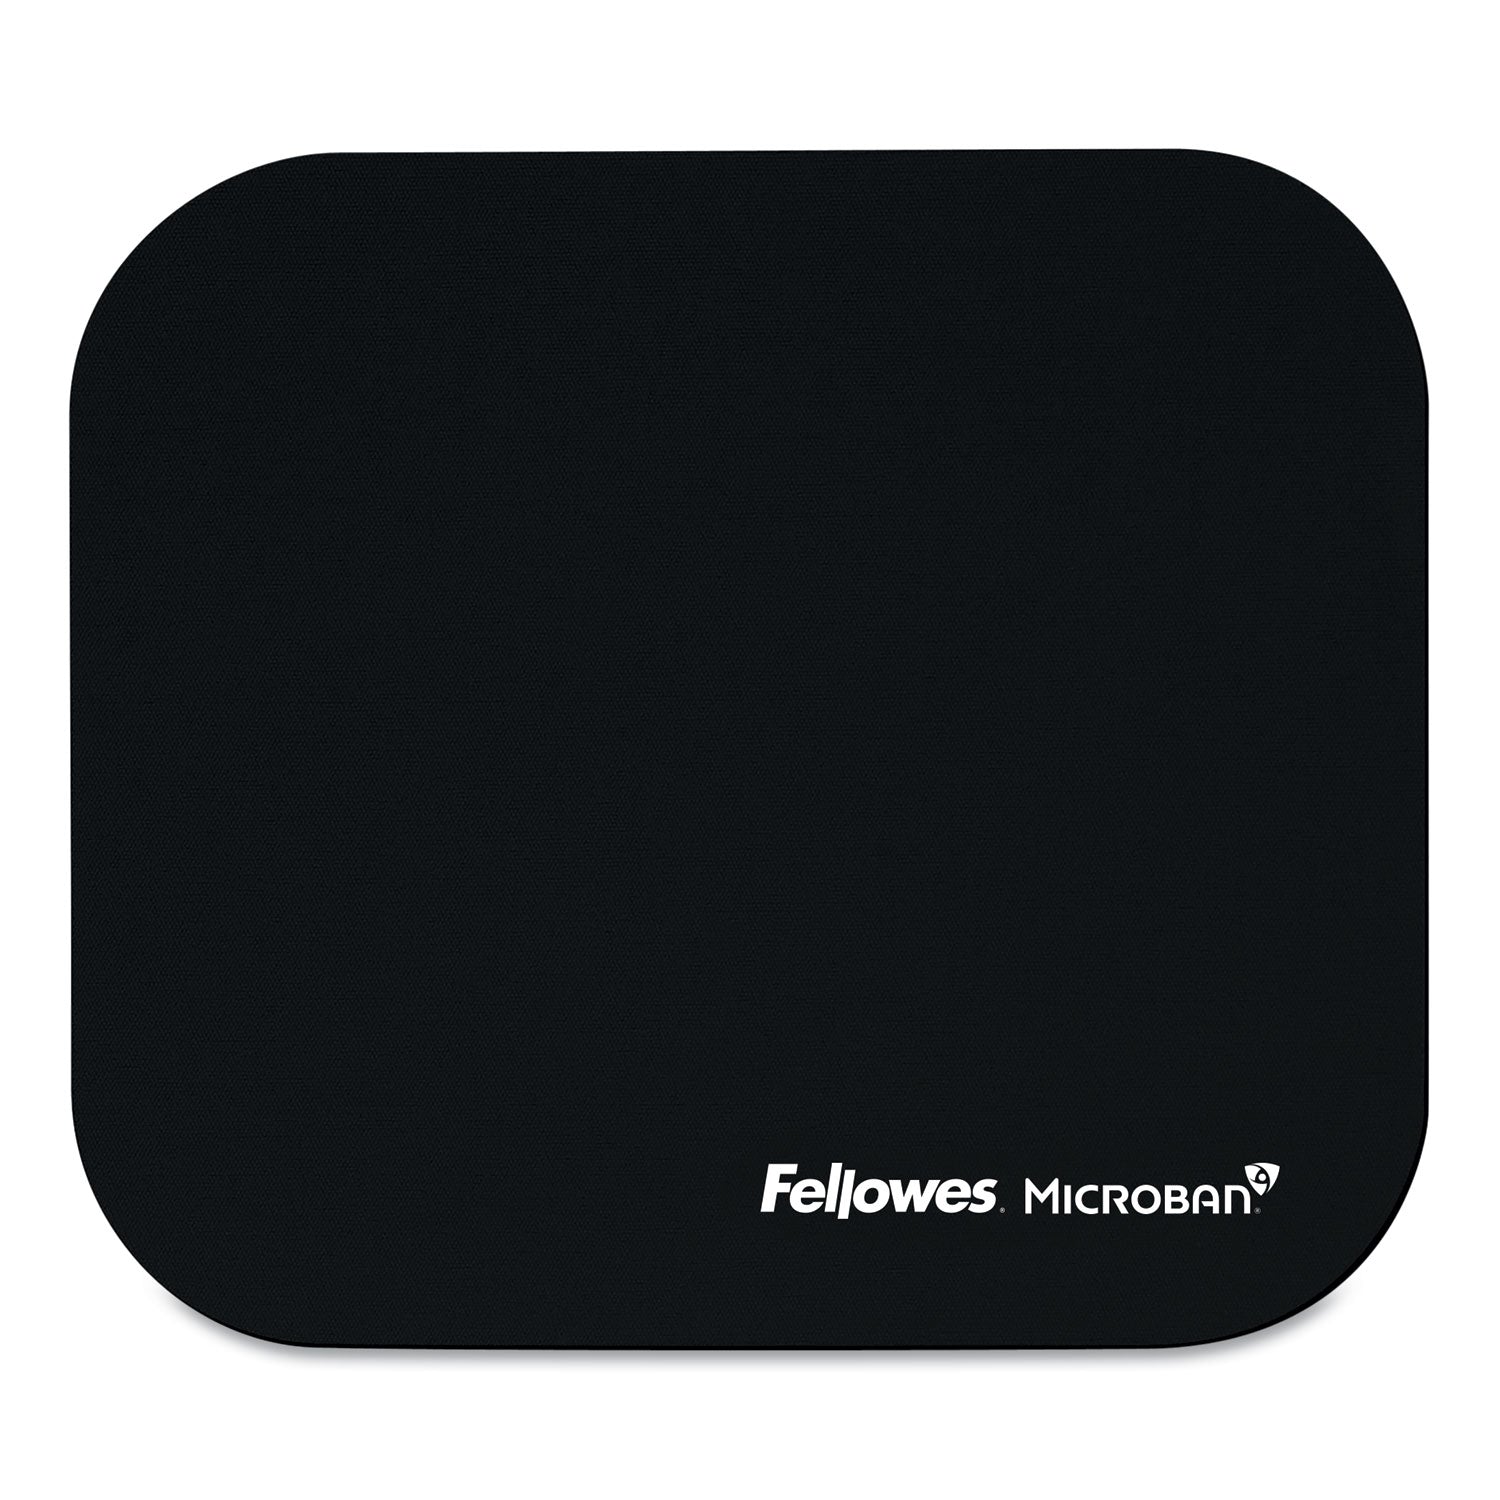 Mouse Pad with Microban Protection, 9 x 8, Black - 